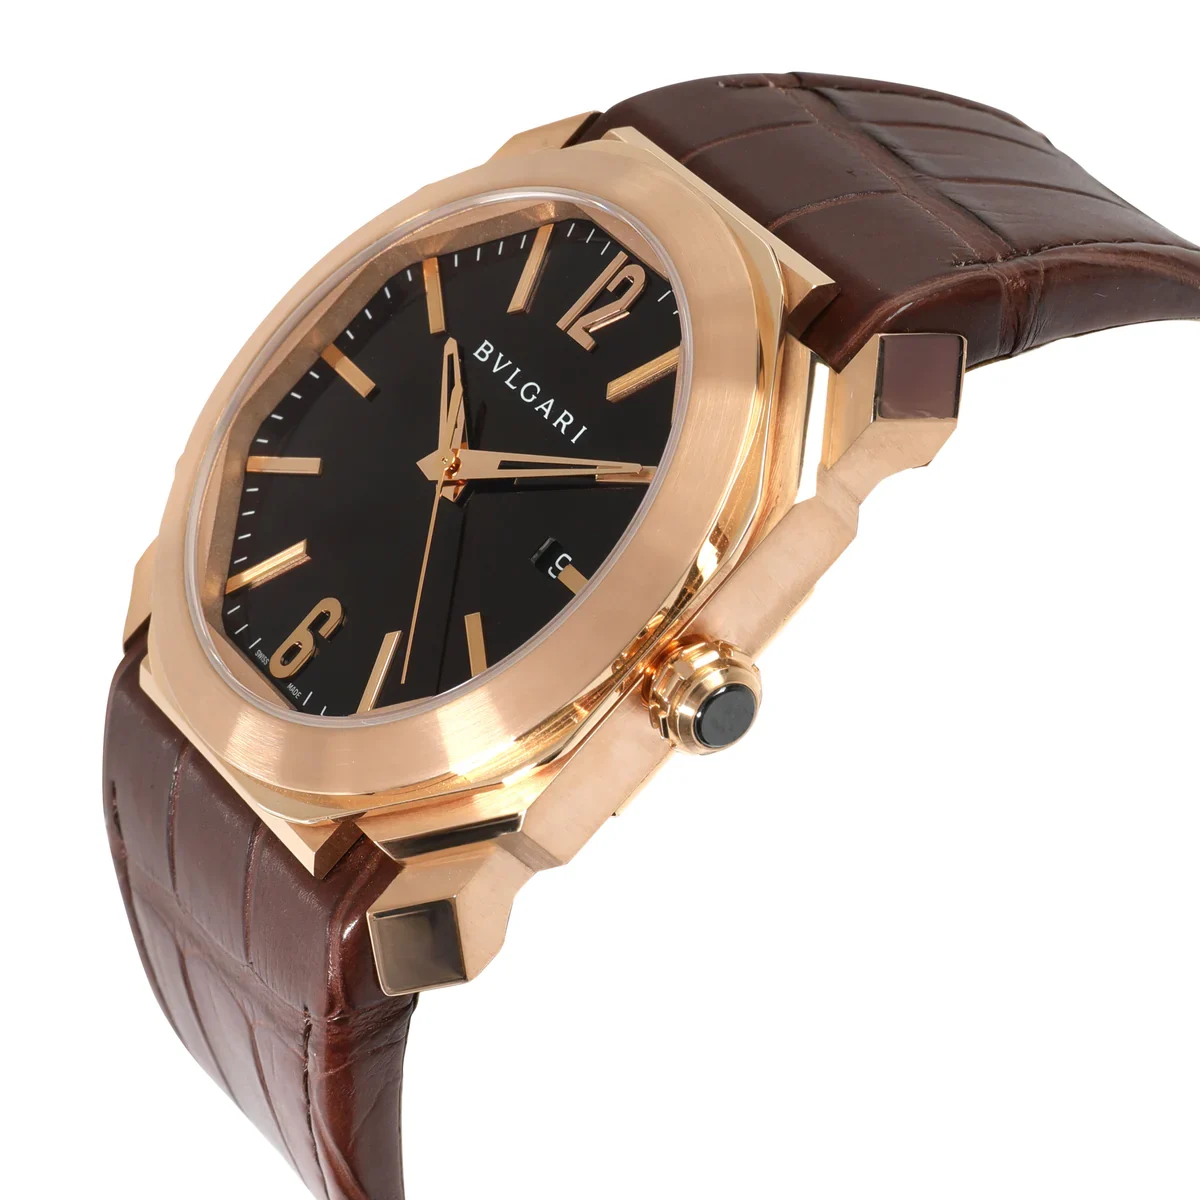 Bvlgari Octo Solotempo Criollo 41 Rose Gold / Brown / Arabic / Strap - Limited to 130 Pieces 102250 BGO P 41 G Listing Image 2